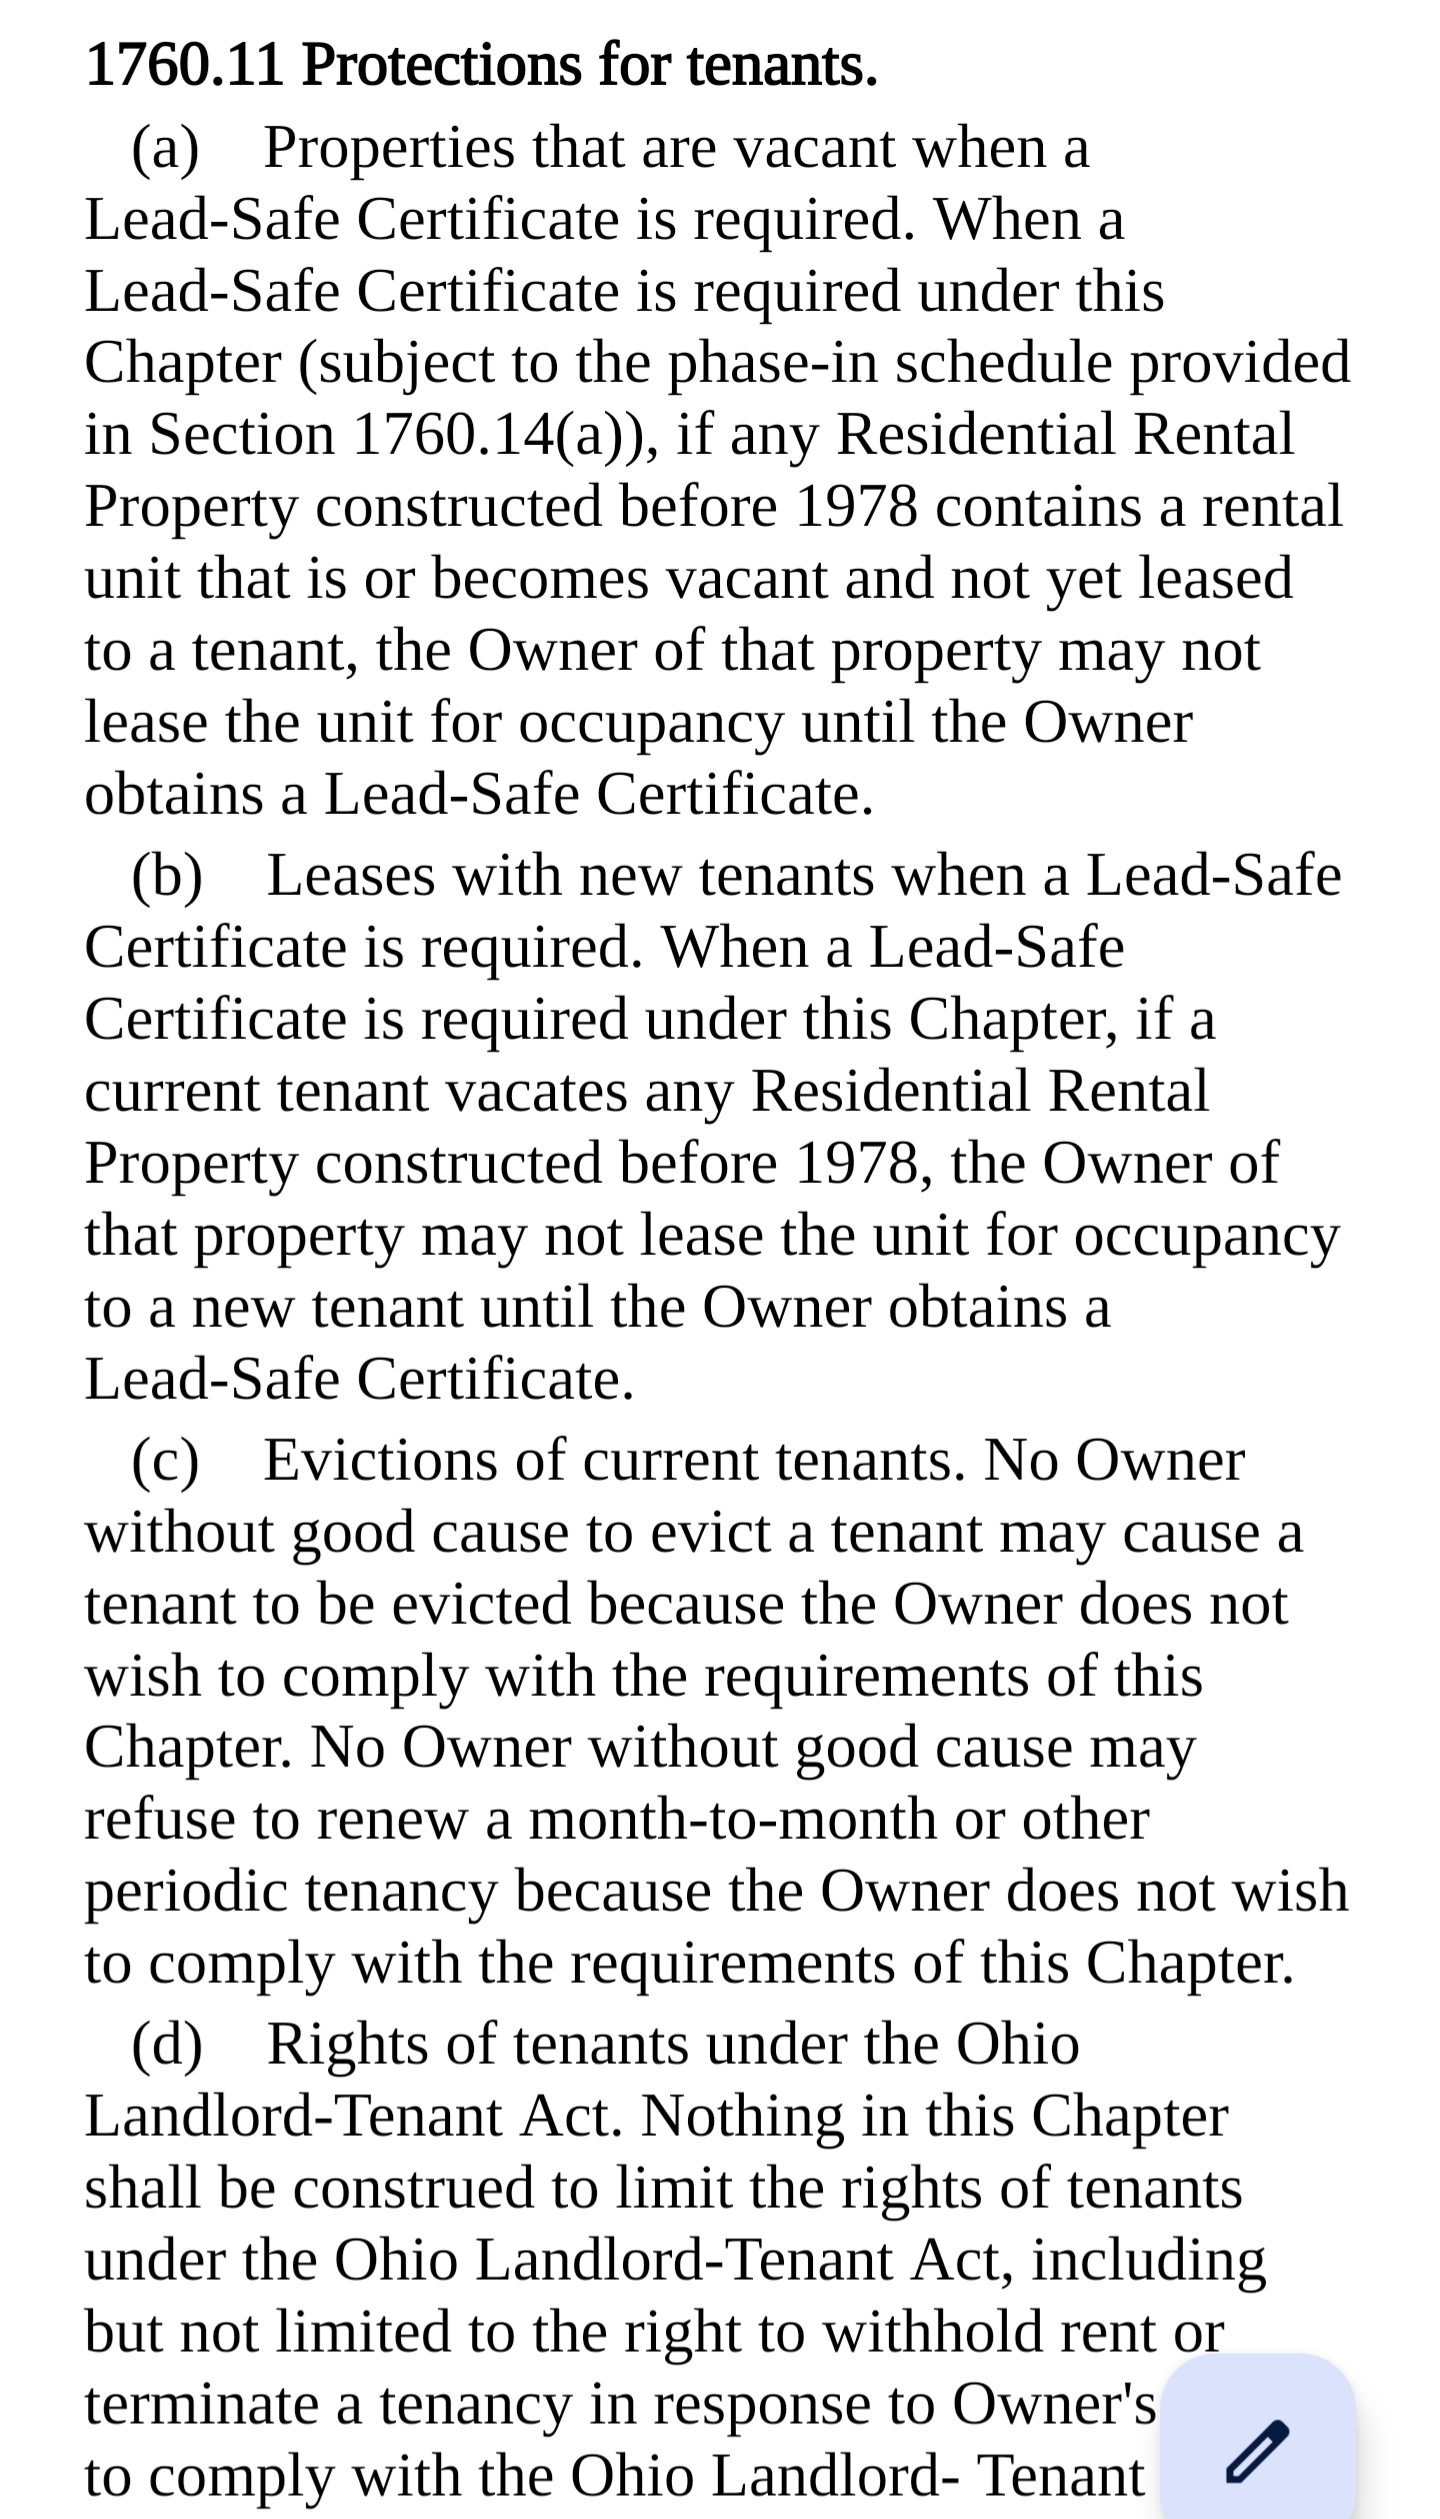 Protections for Tenants